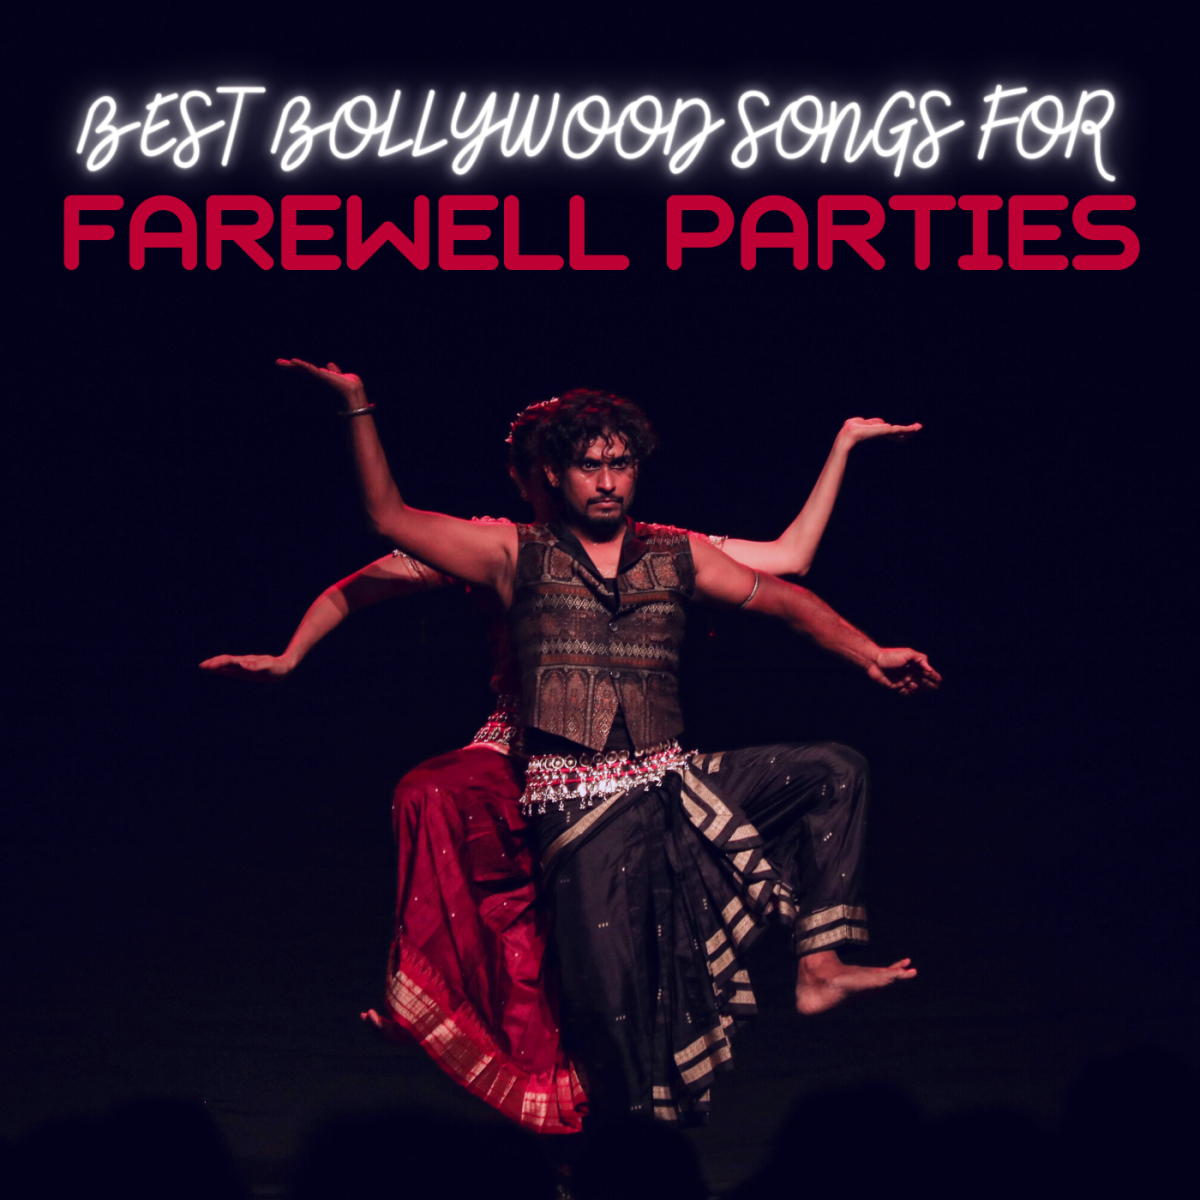 100 Best Bollywood Songs for Farewell Parties - Spinditty